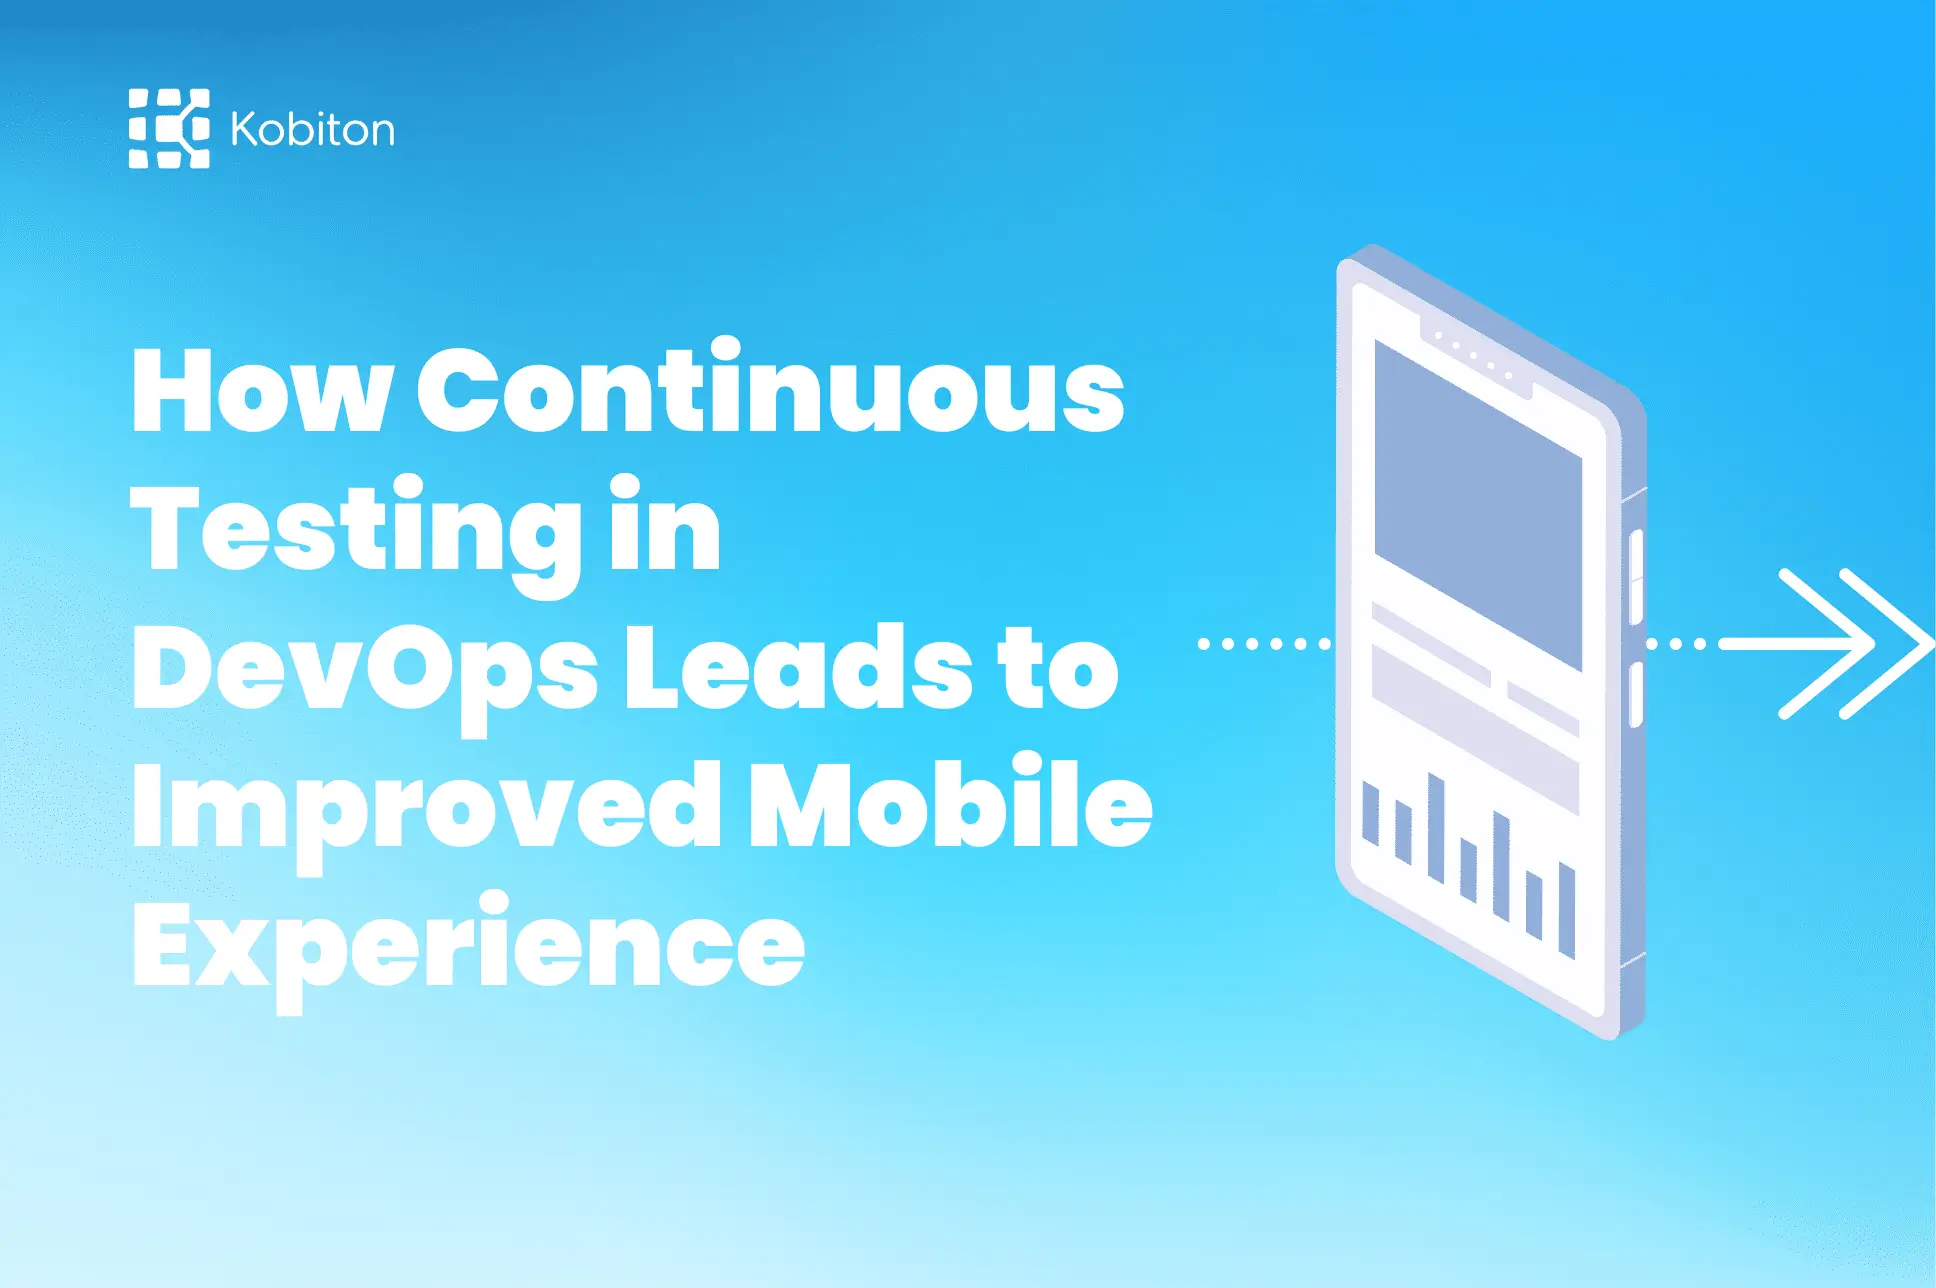 How Continuous Testing in DevOps Leads to Improved Mobile Experience